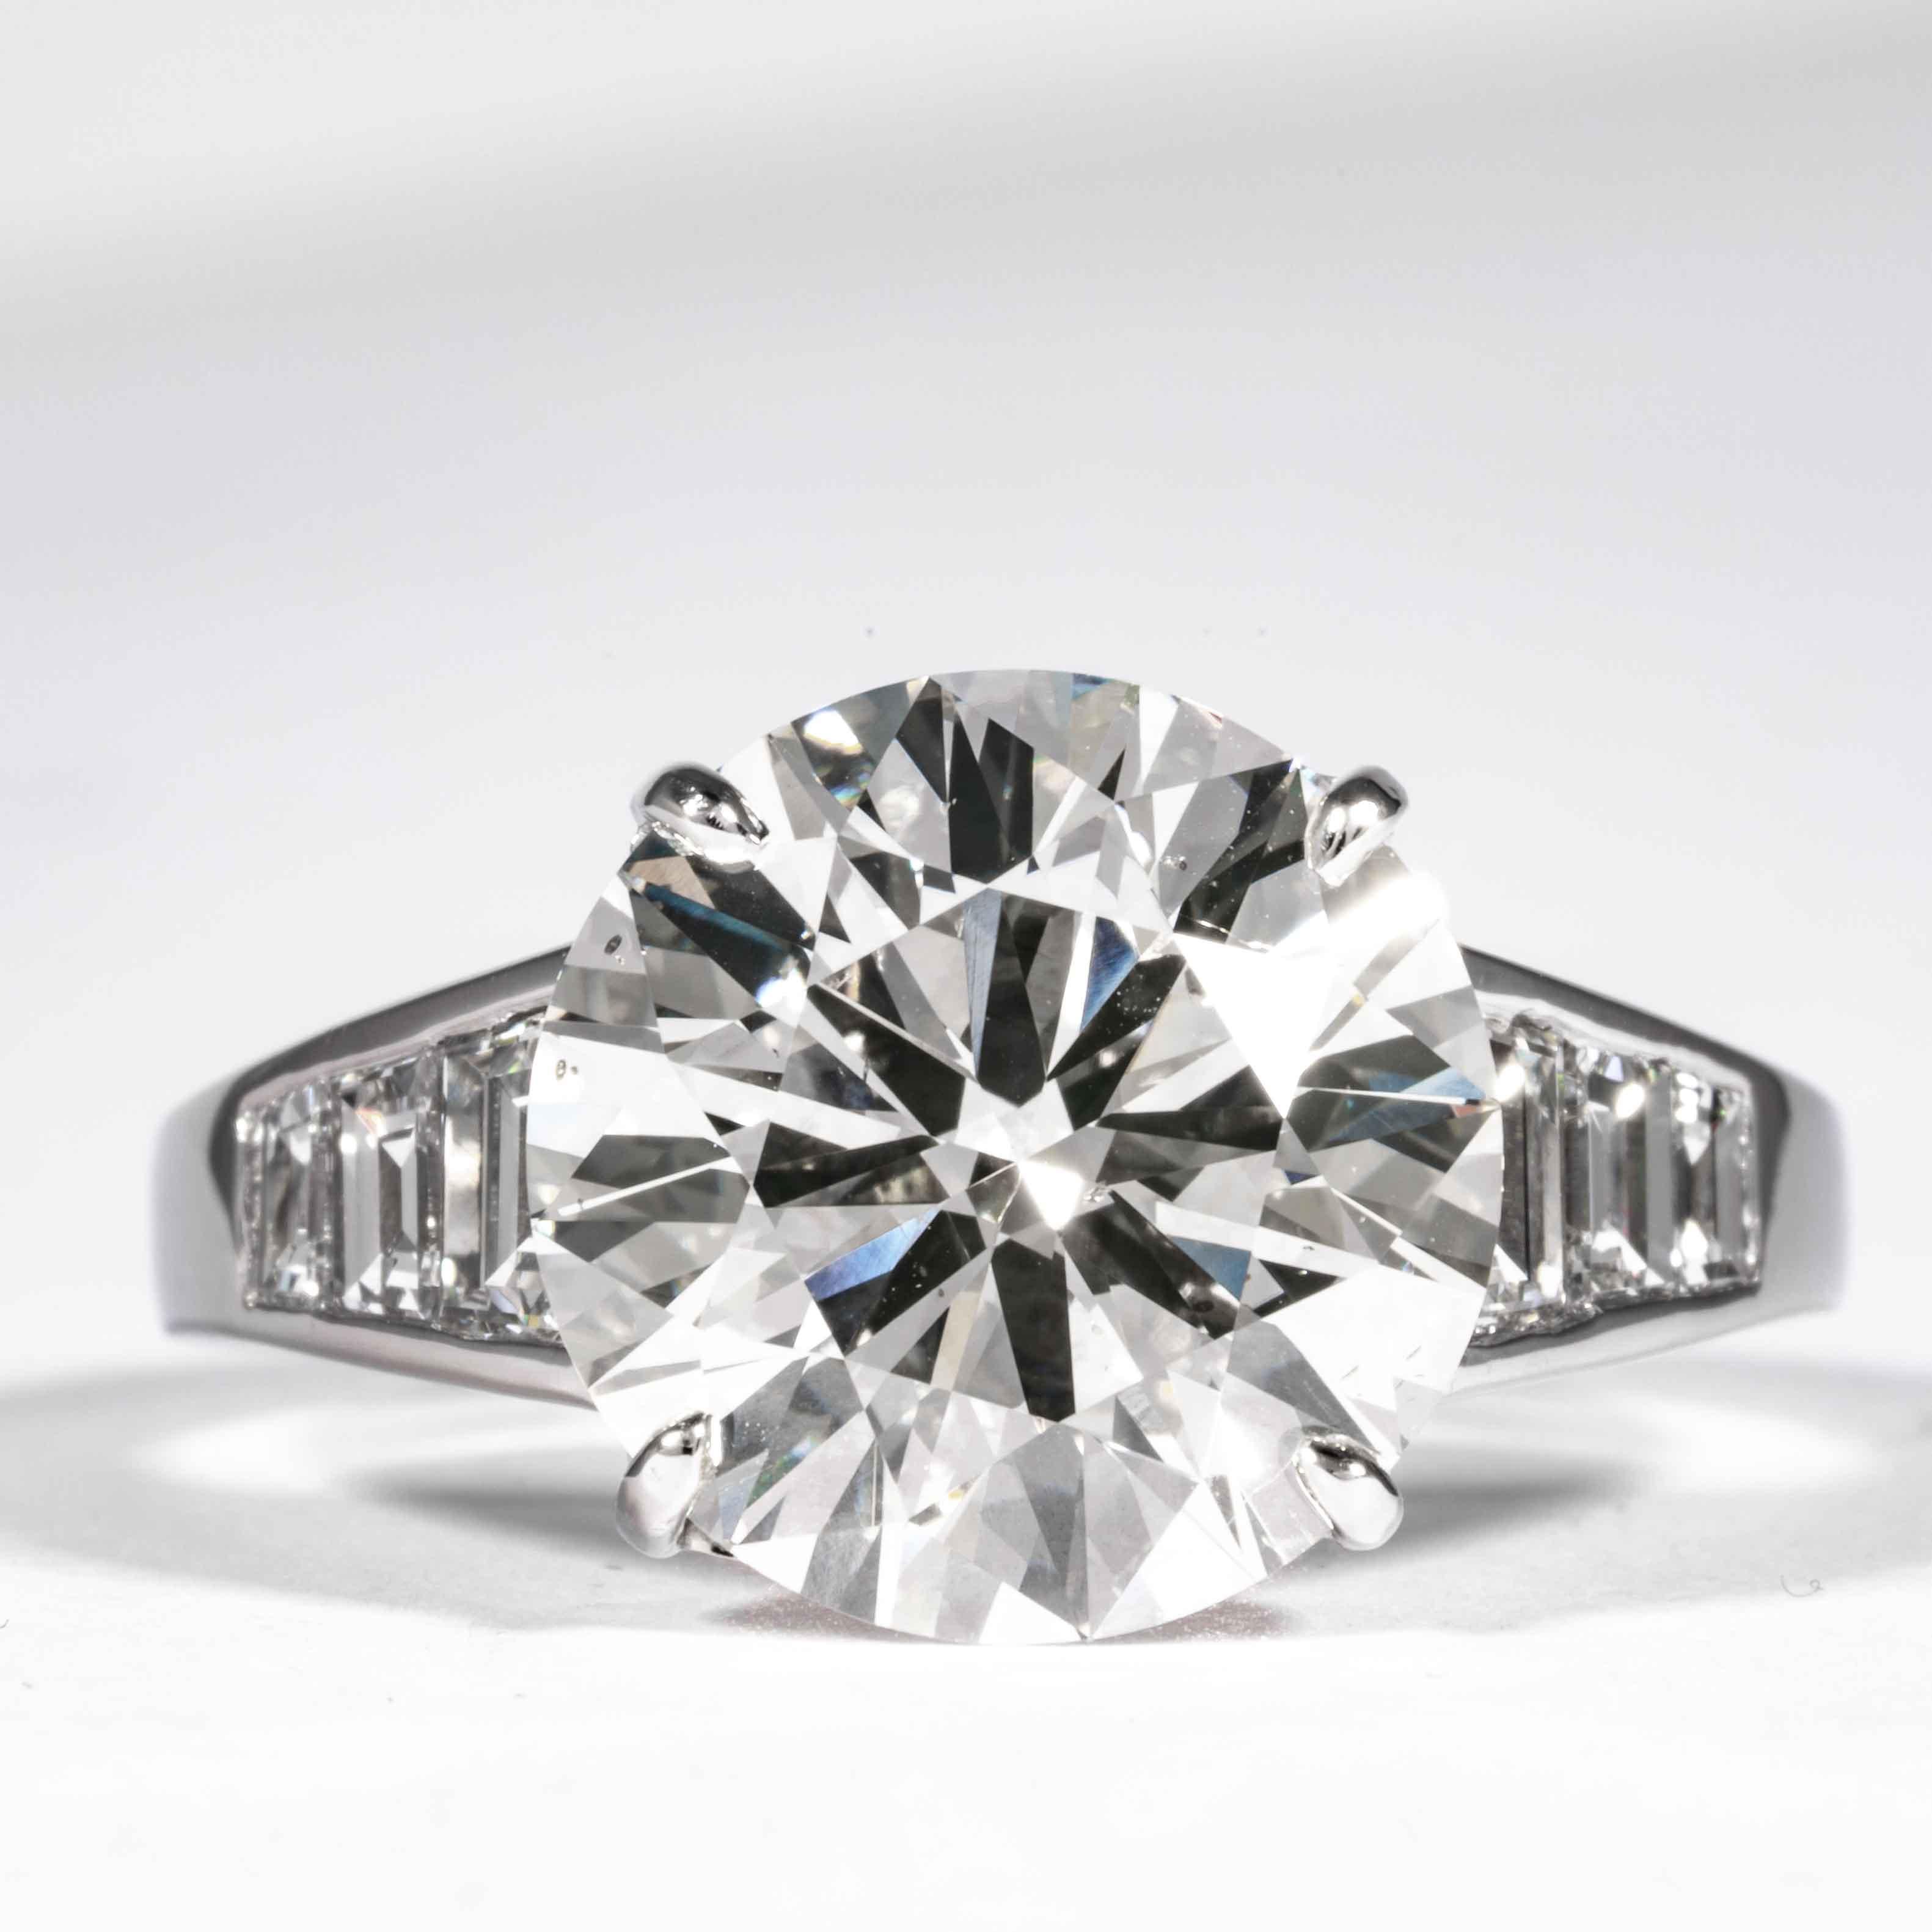 This elegant and classic diamond ring is offered by Shreve, Crump & Low. This 5.60 carat GIA certified J SI1 round brilliant cut diamond measuring 11.60 x 11.67 x 6.88mm is custom set in a handcrafted Shreve, Crump & Low Platinum and Diamond ring. 